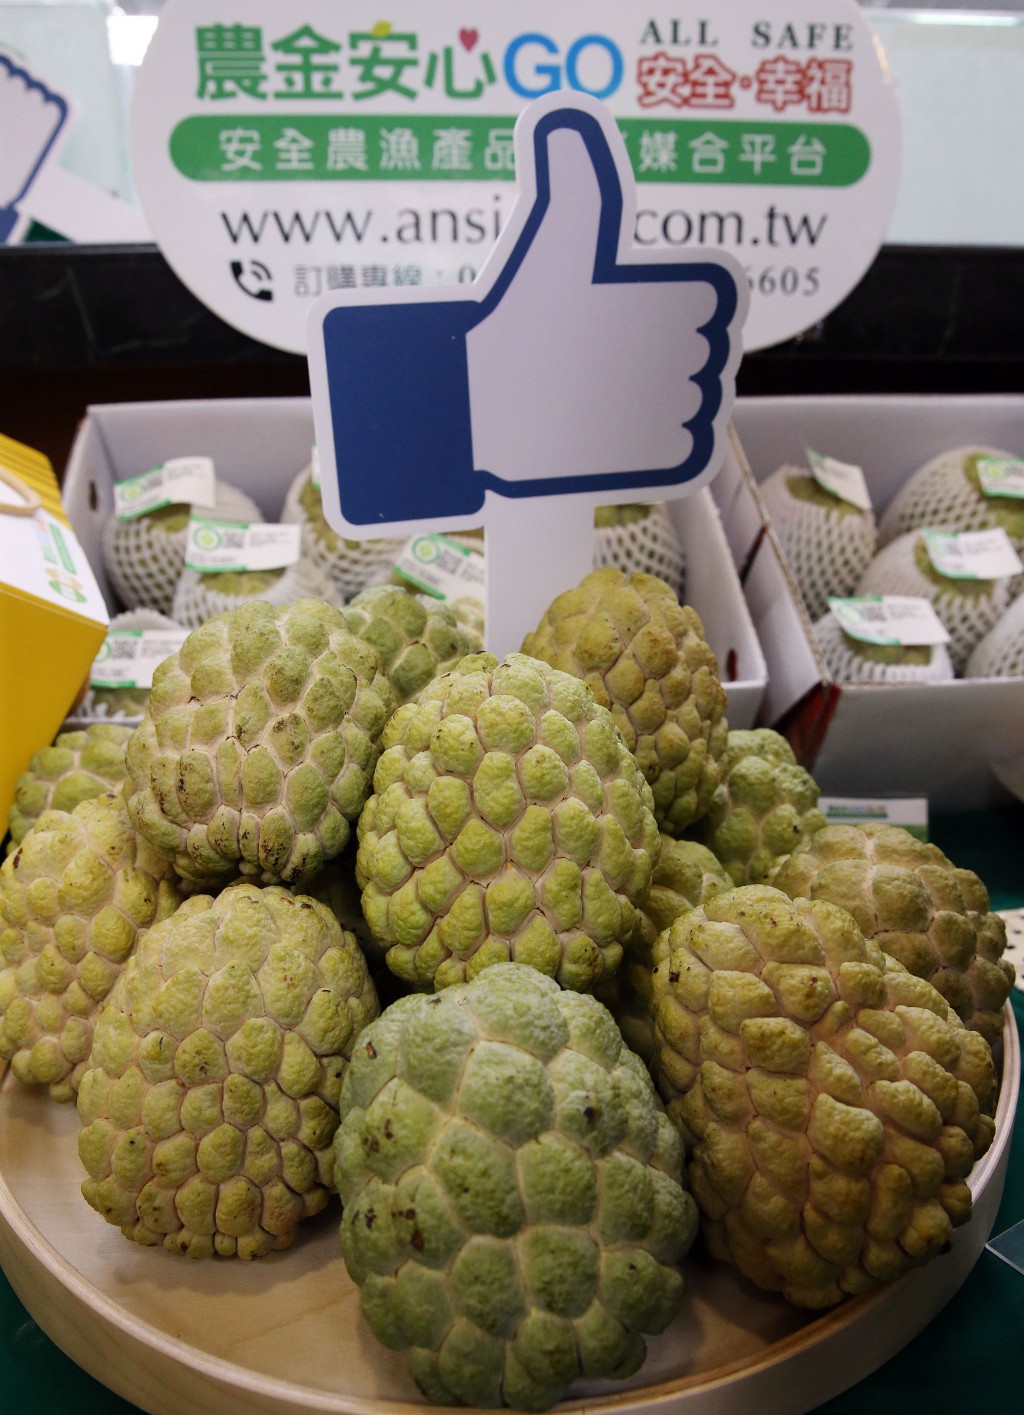 Taiwan is banning the import of frozen sugar apples from China. 
